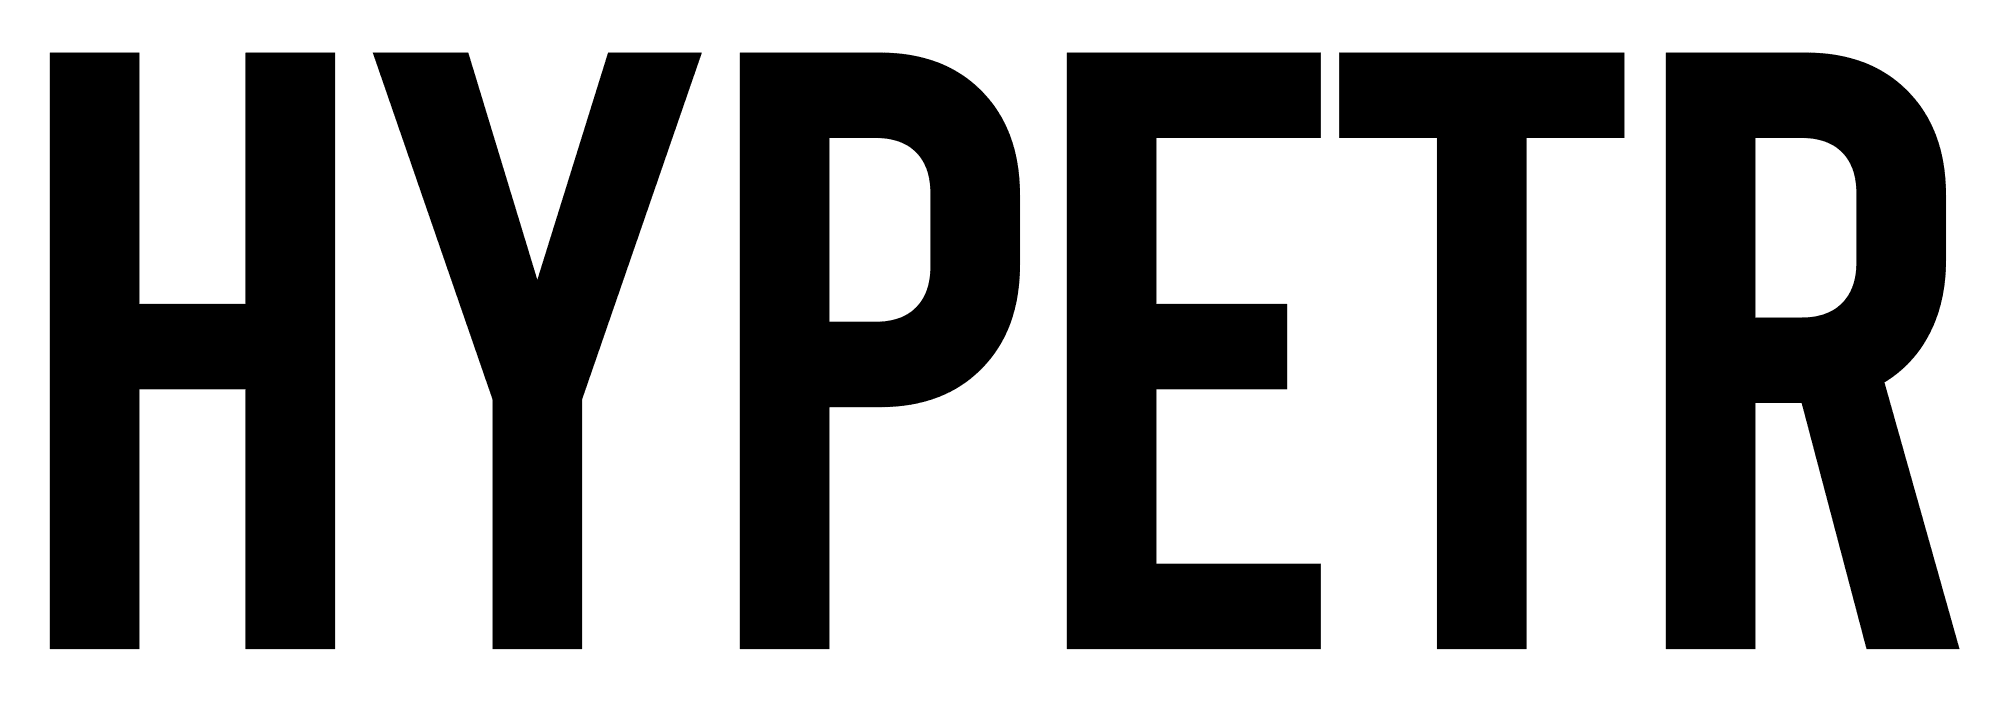 HYPETR Online Store 